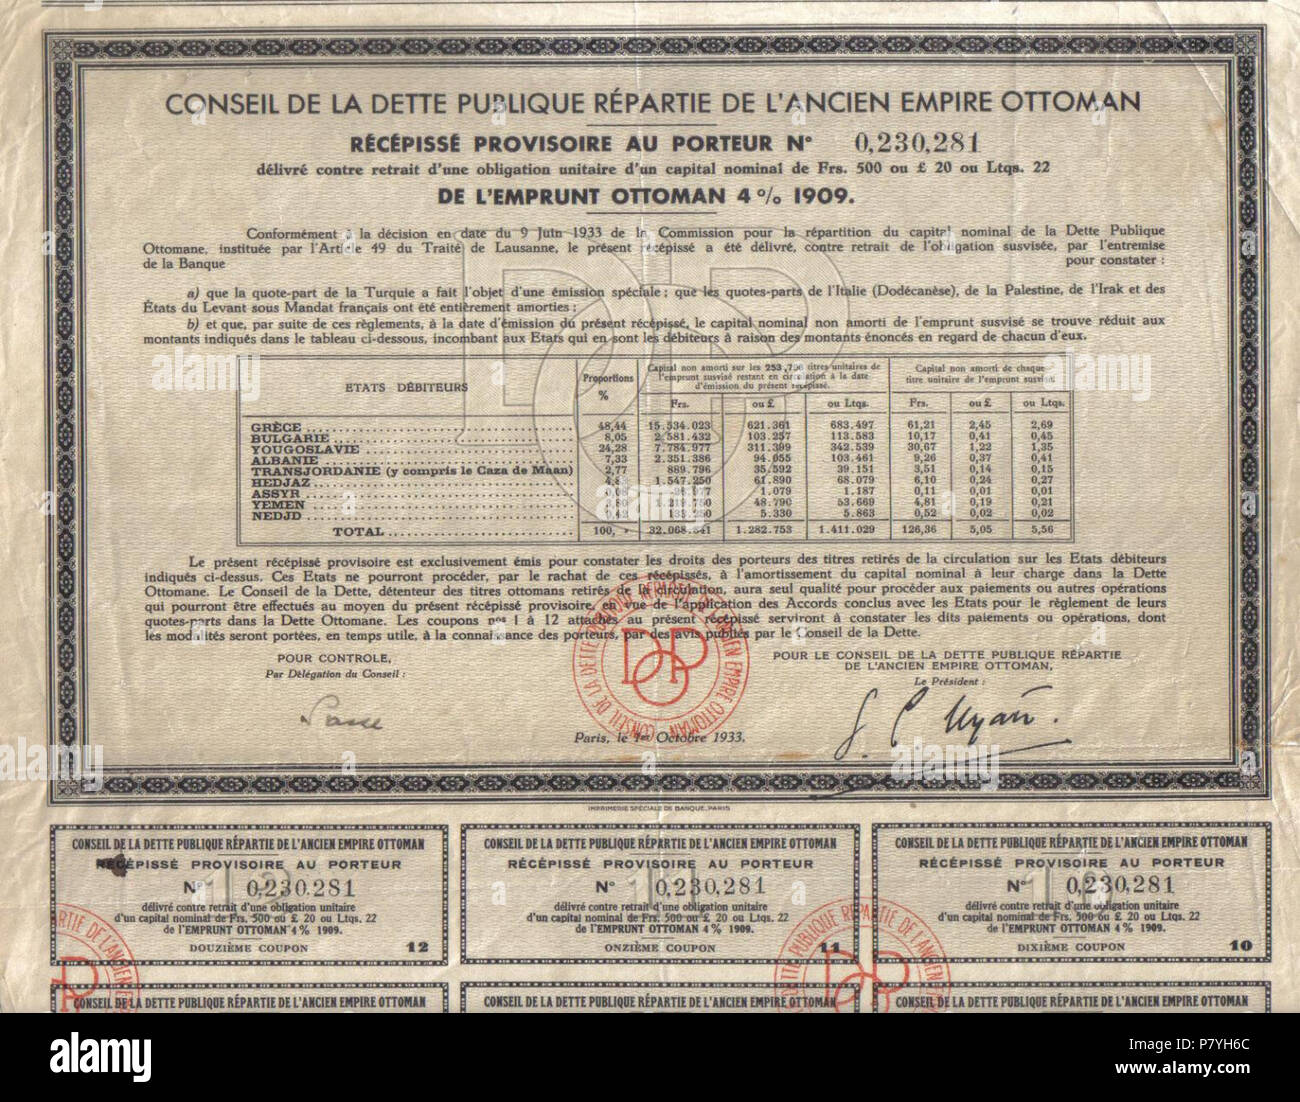 English: 1933 provisional certificate intended for bondholders of a 1909 public loan contracted by the defunct Ottoman Empire. The certificate lists the financial obligations incurred by successor states of the Ottoman Empire (aside of the Republic of Turkey) in relation to that loan. The share of each of those state is related to portions of their territory that belonged to the Ottoman Empire when the loan was contracted. Greece, which had annexed most of Macedonia and Epirus, has the highest obligation due to both the size and the wealth of the territories annexed. The definitive allotment o Stock Photo